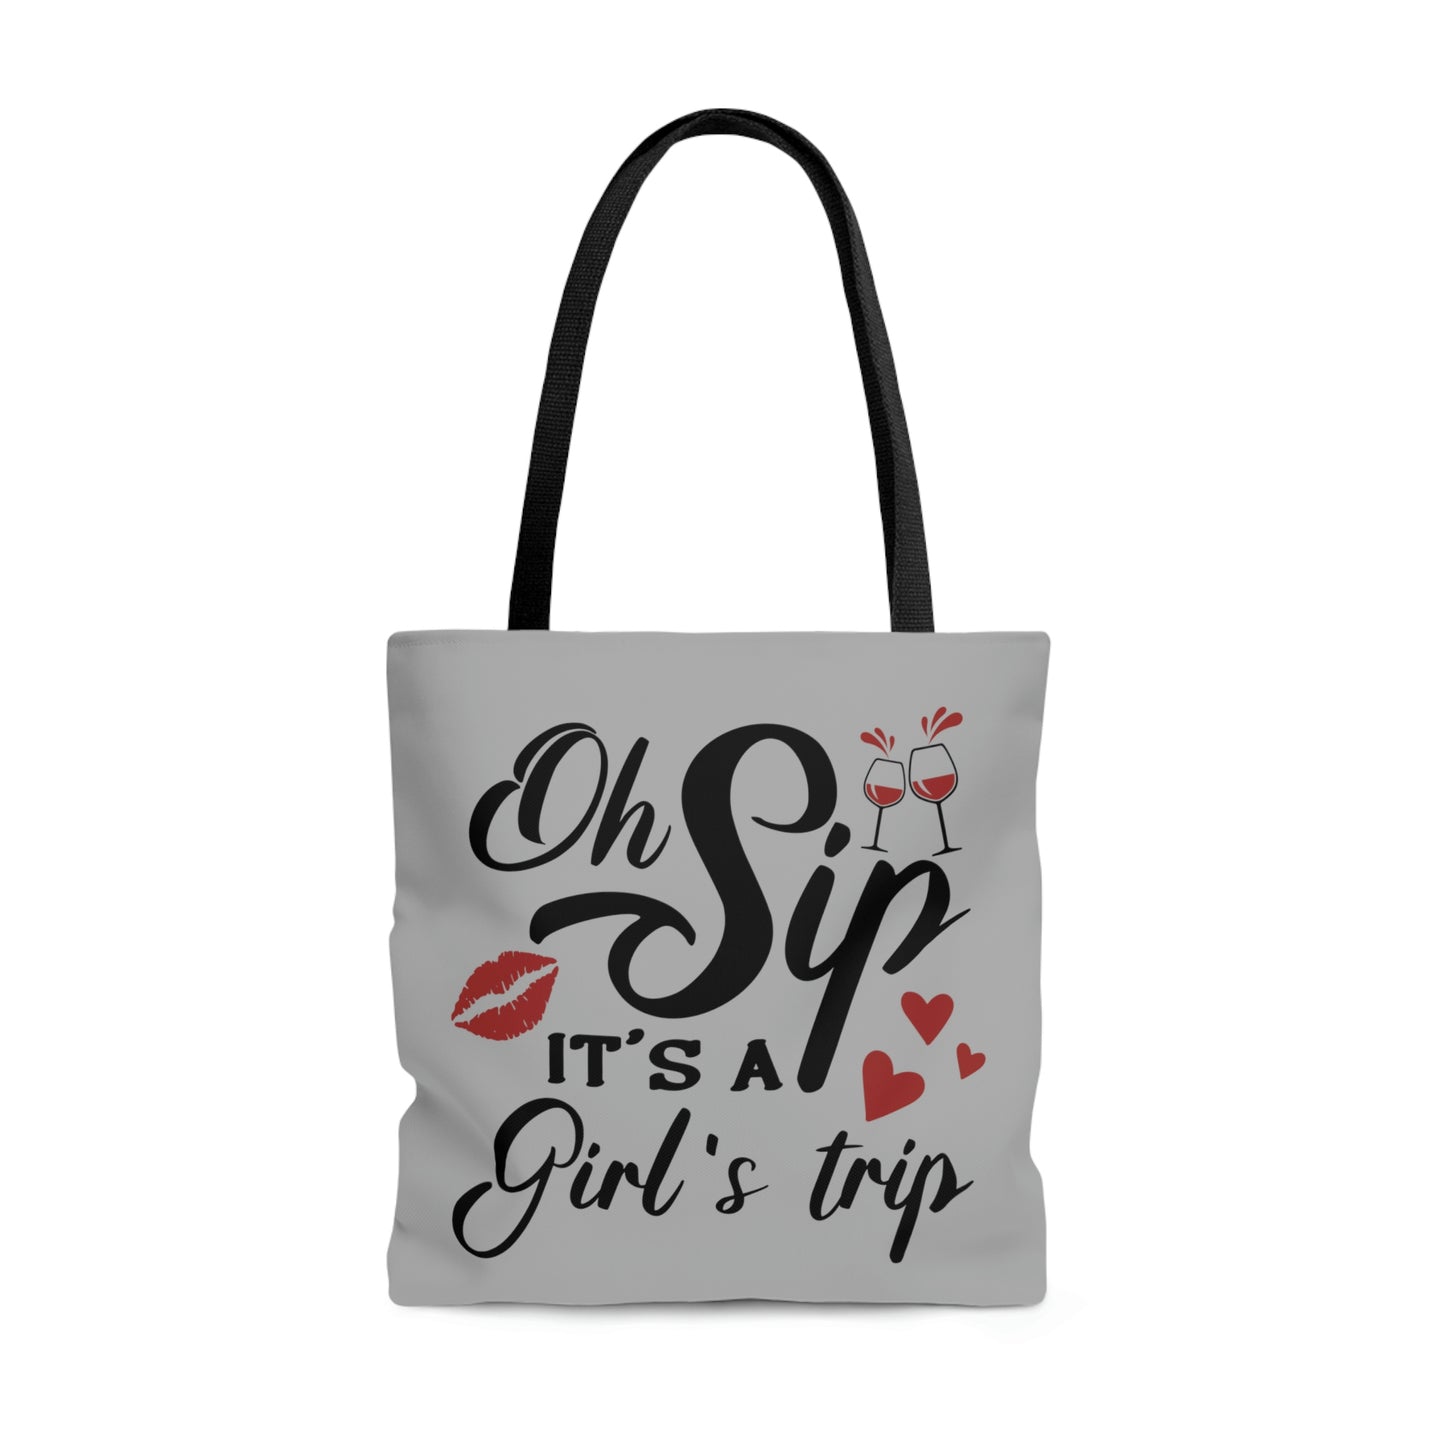 OH SIP IT'S A GIRLS TRIP TOTE BAG - LIGHT GREY